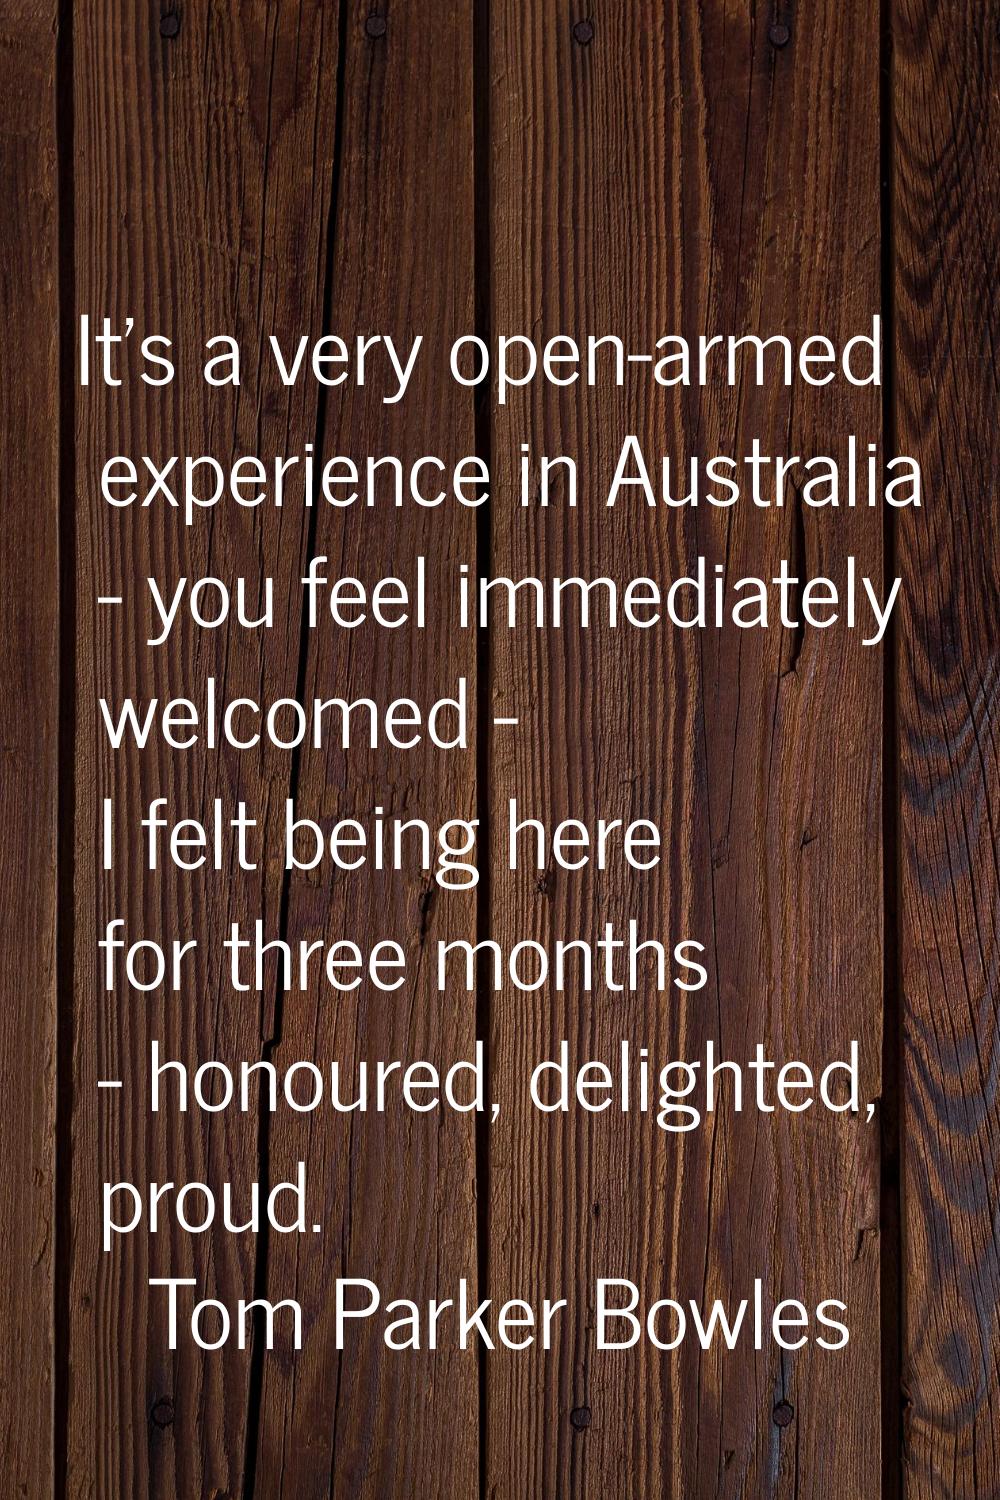 It's a very open-armed experience in Australia - you feel immediately welcomed - I felt being here 